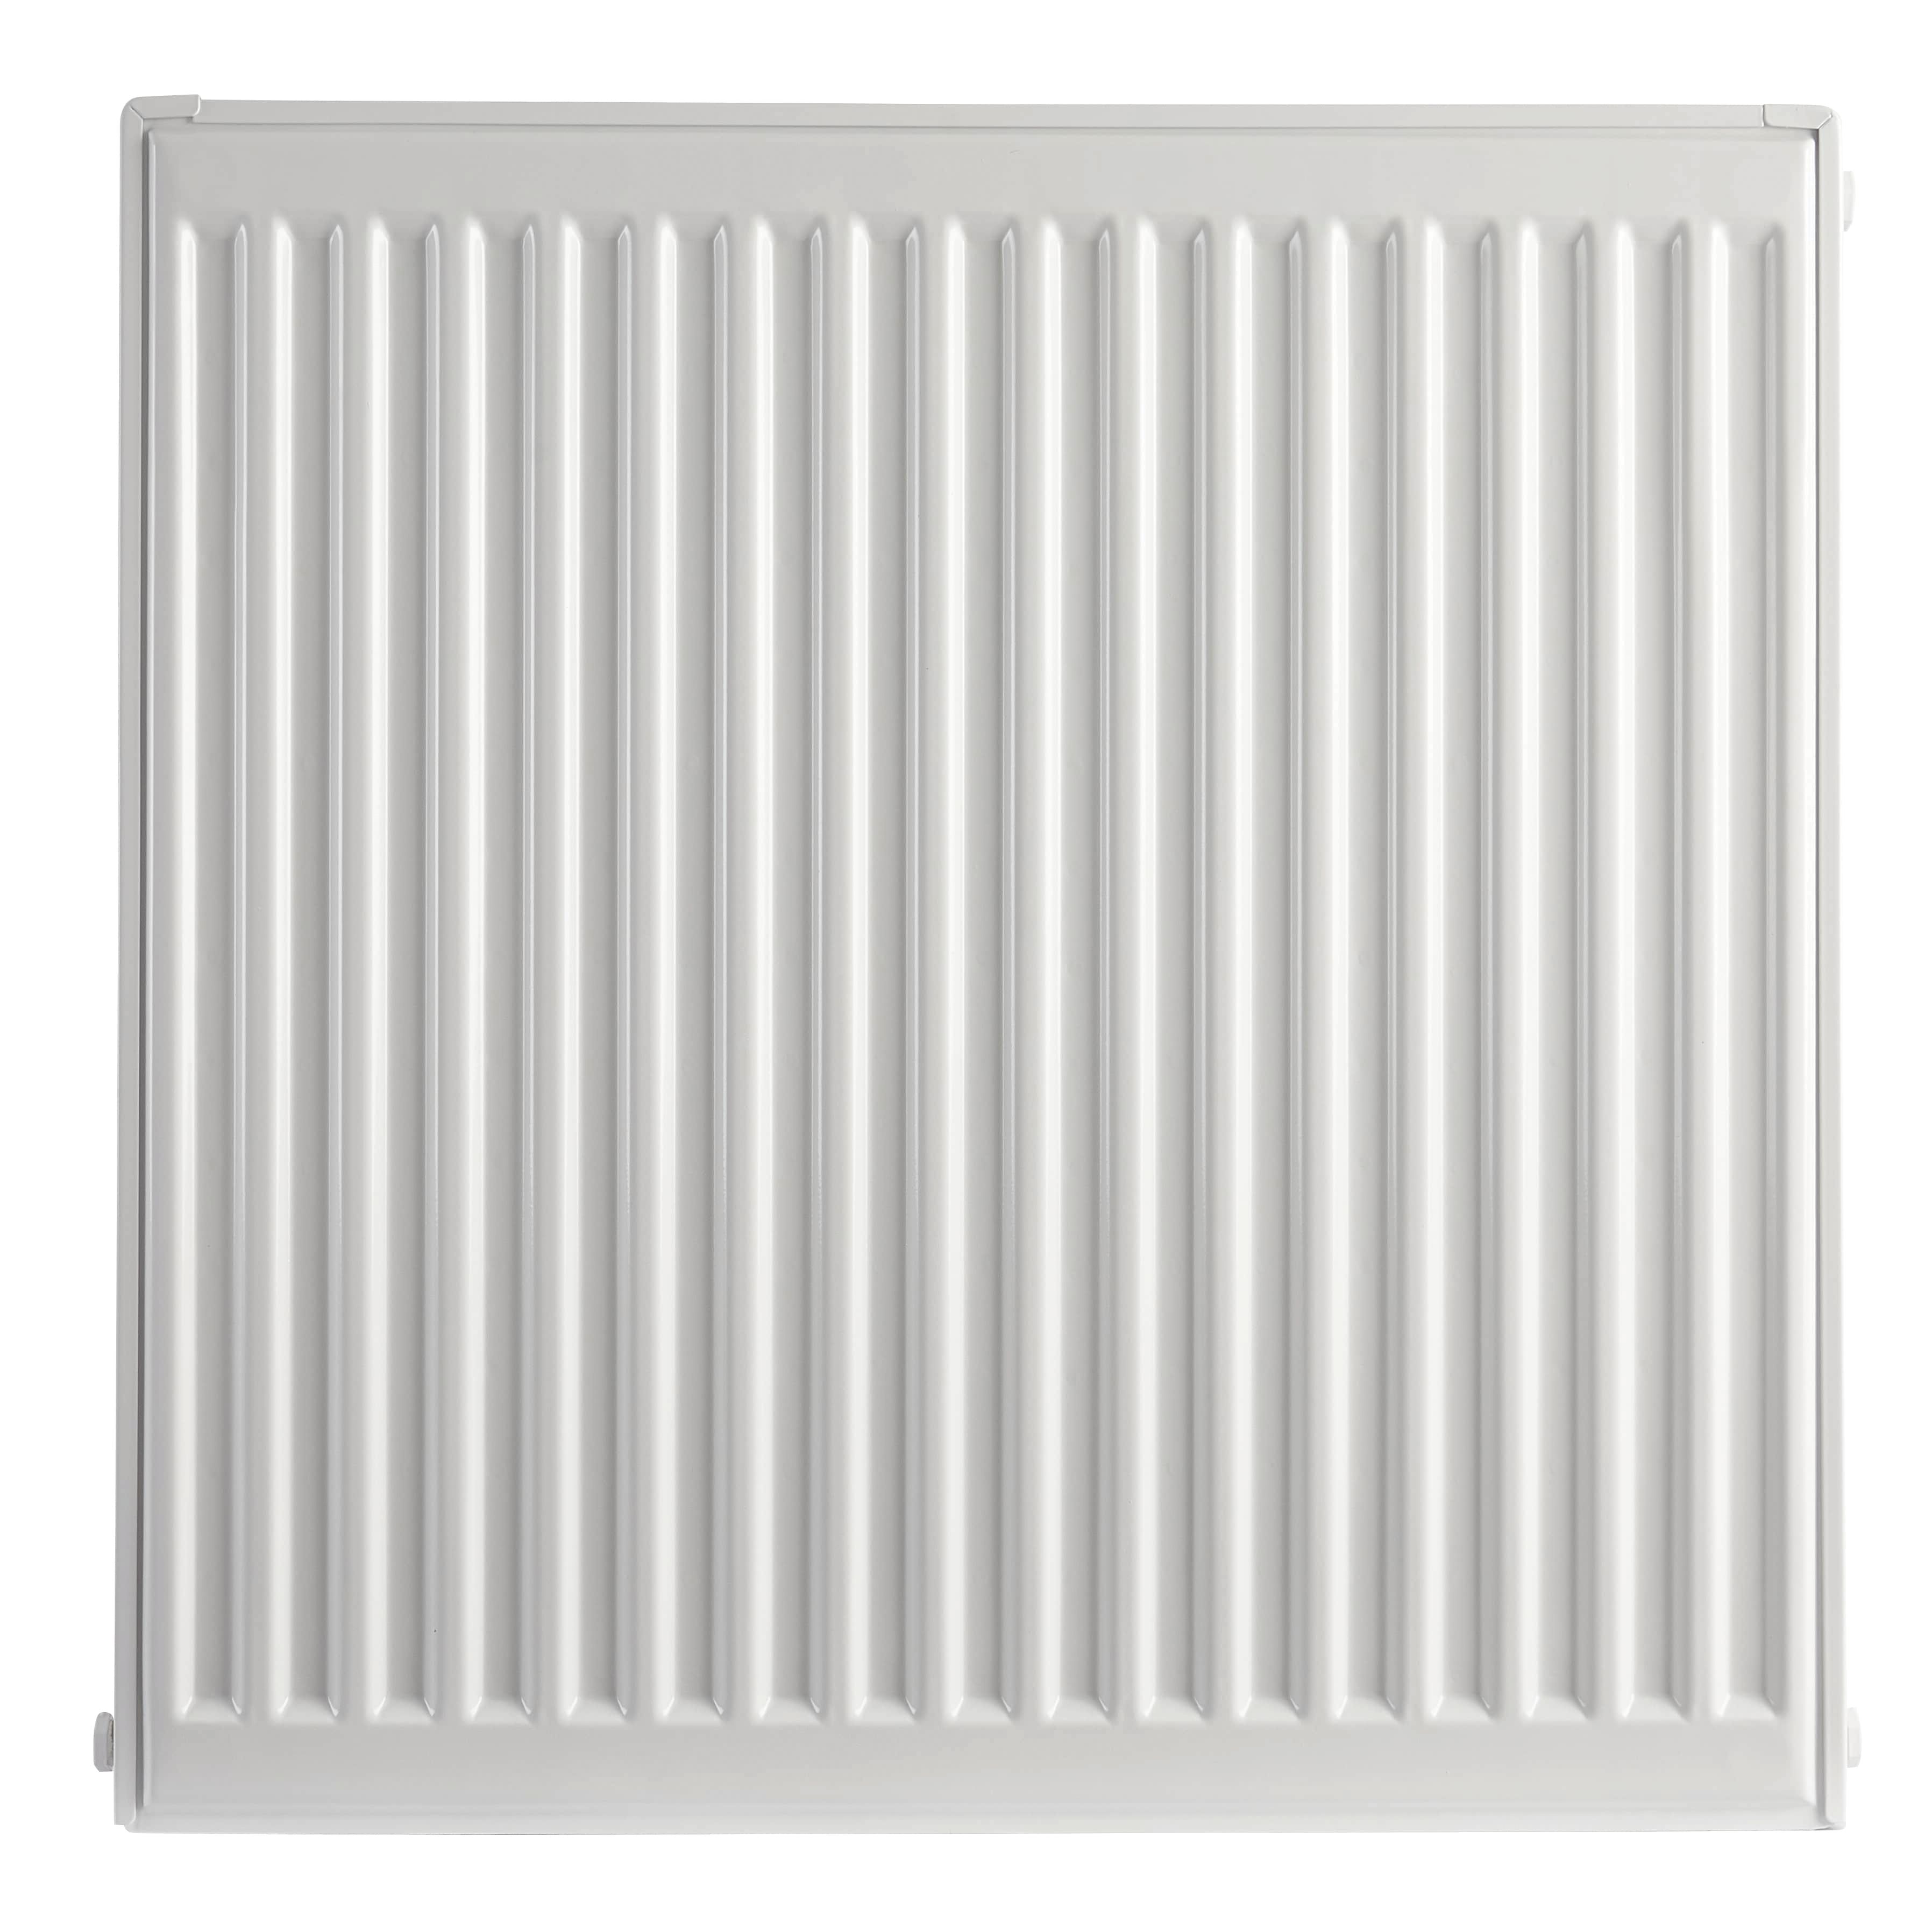 Homeline by Stelrad 600 x 600mm Type 21 Double Panel Plus Single Convector Radiator